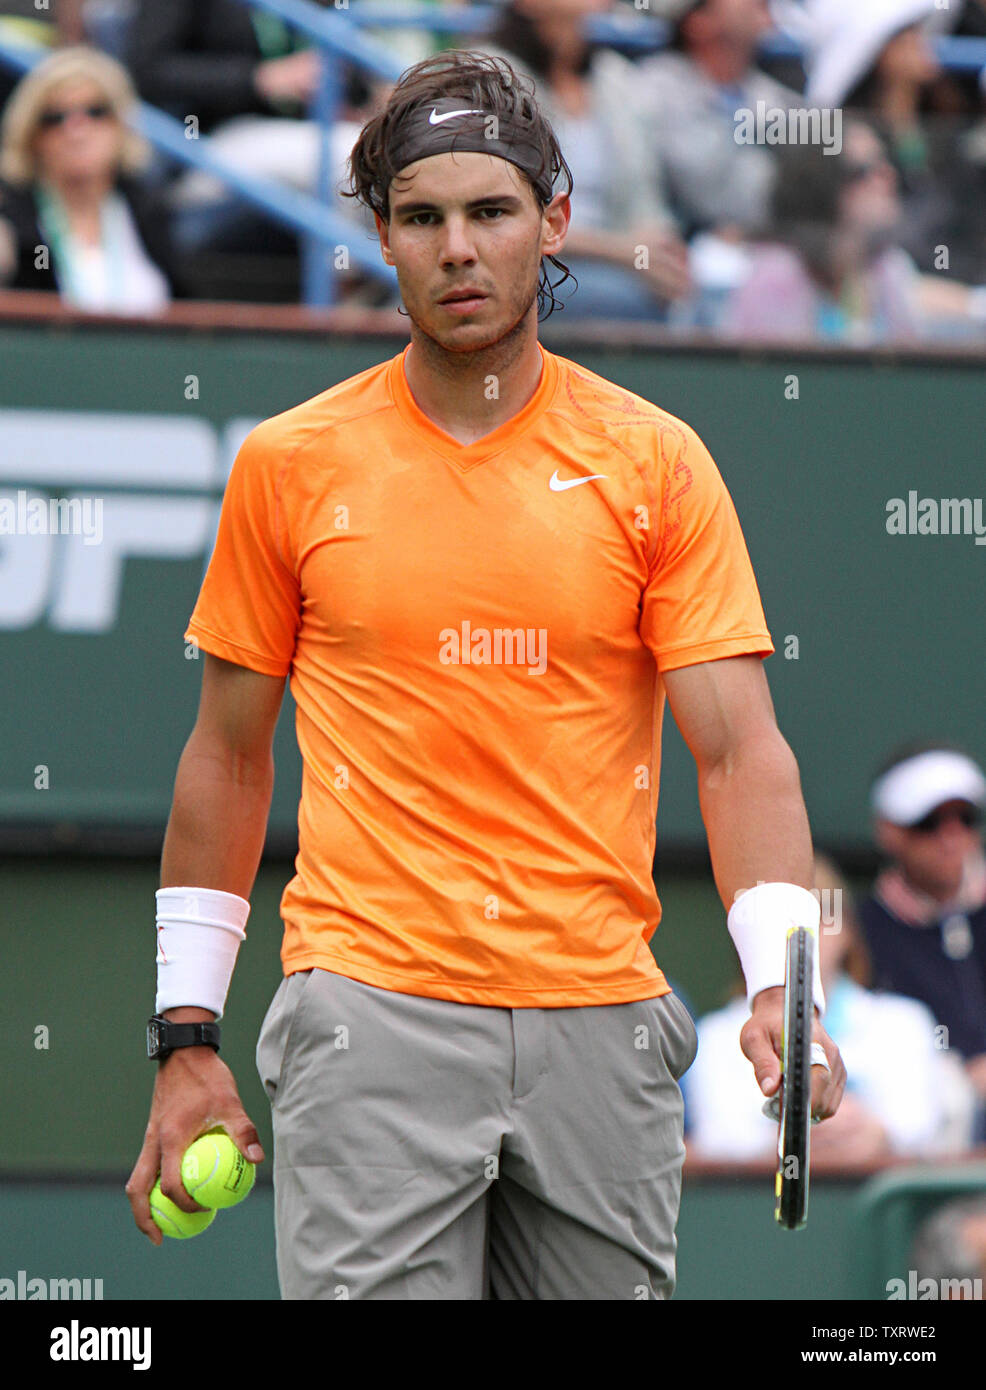 Spaniard Rafael Nadal pauses during his mens final match against Serbian Novak Djokovic at the BNP Paribas Open in Indian Wells, California on March 20, 2011.  Djokovic defeated Nadal 4-6, 6-3, 6-2 to win the tournament.   UPI/David Silpa Stock Photo